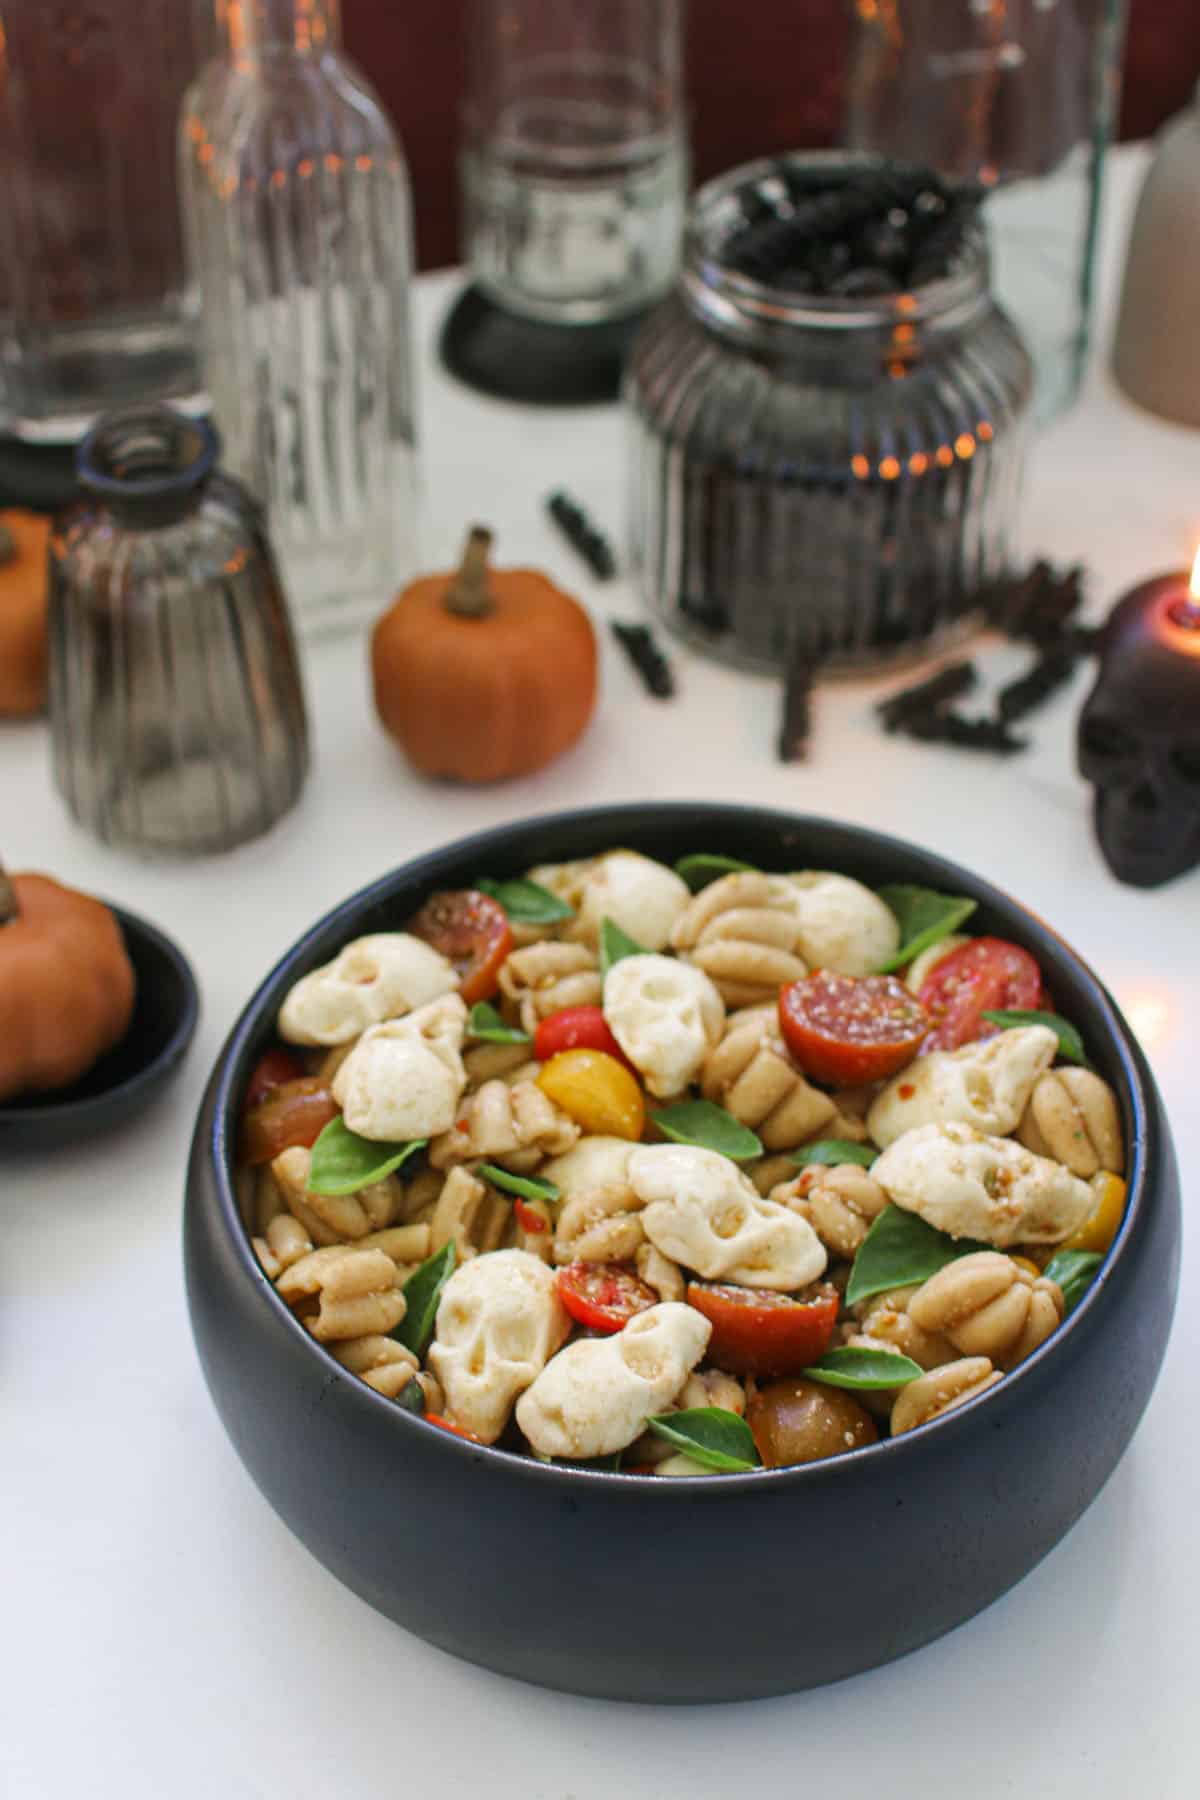 A close up angled photo of Halloween Pasta Salad in a black bowl with pumpkin shaped pasta, mini basil leaves, sliced cherry tomatoes and mozzarella skulls sitting on a white marble table. In the background are assorted decorations of mini orange pumpkins, clear glass bottles and candles with a dark red background.